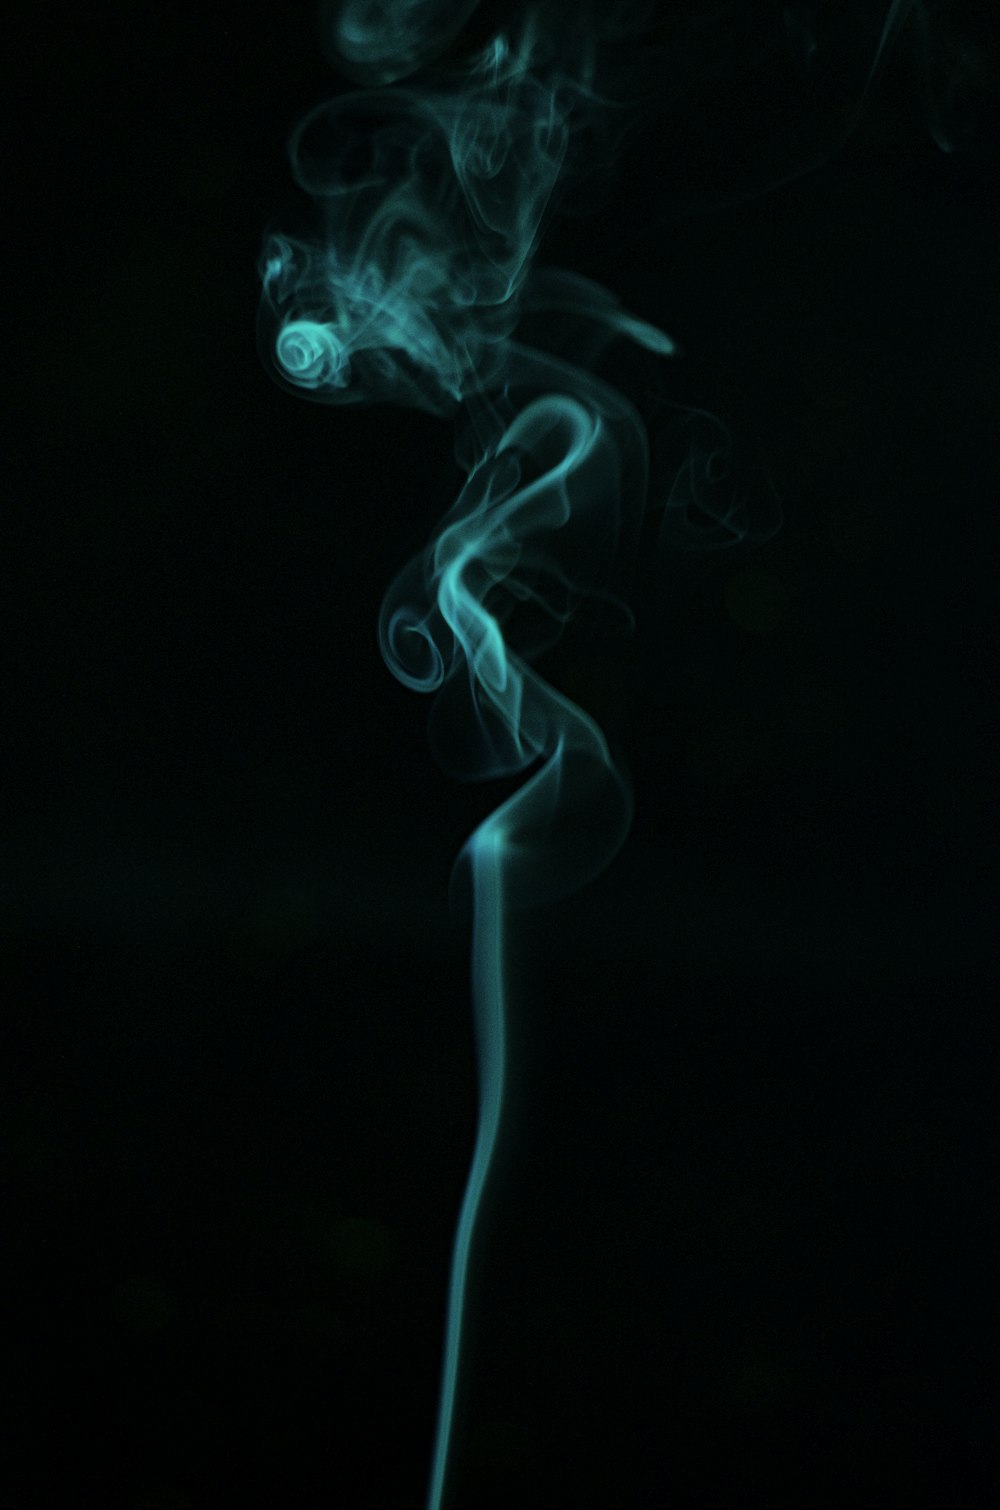 smoke is shown in the dark with a black background